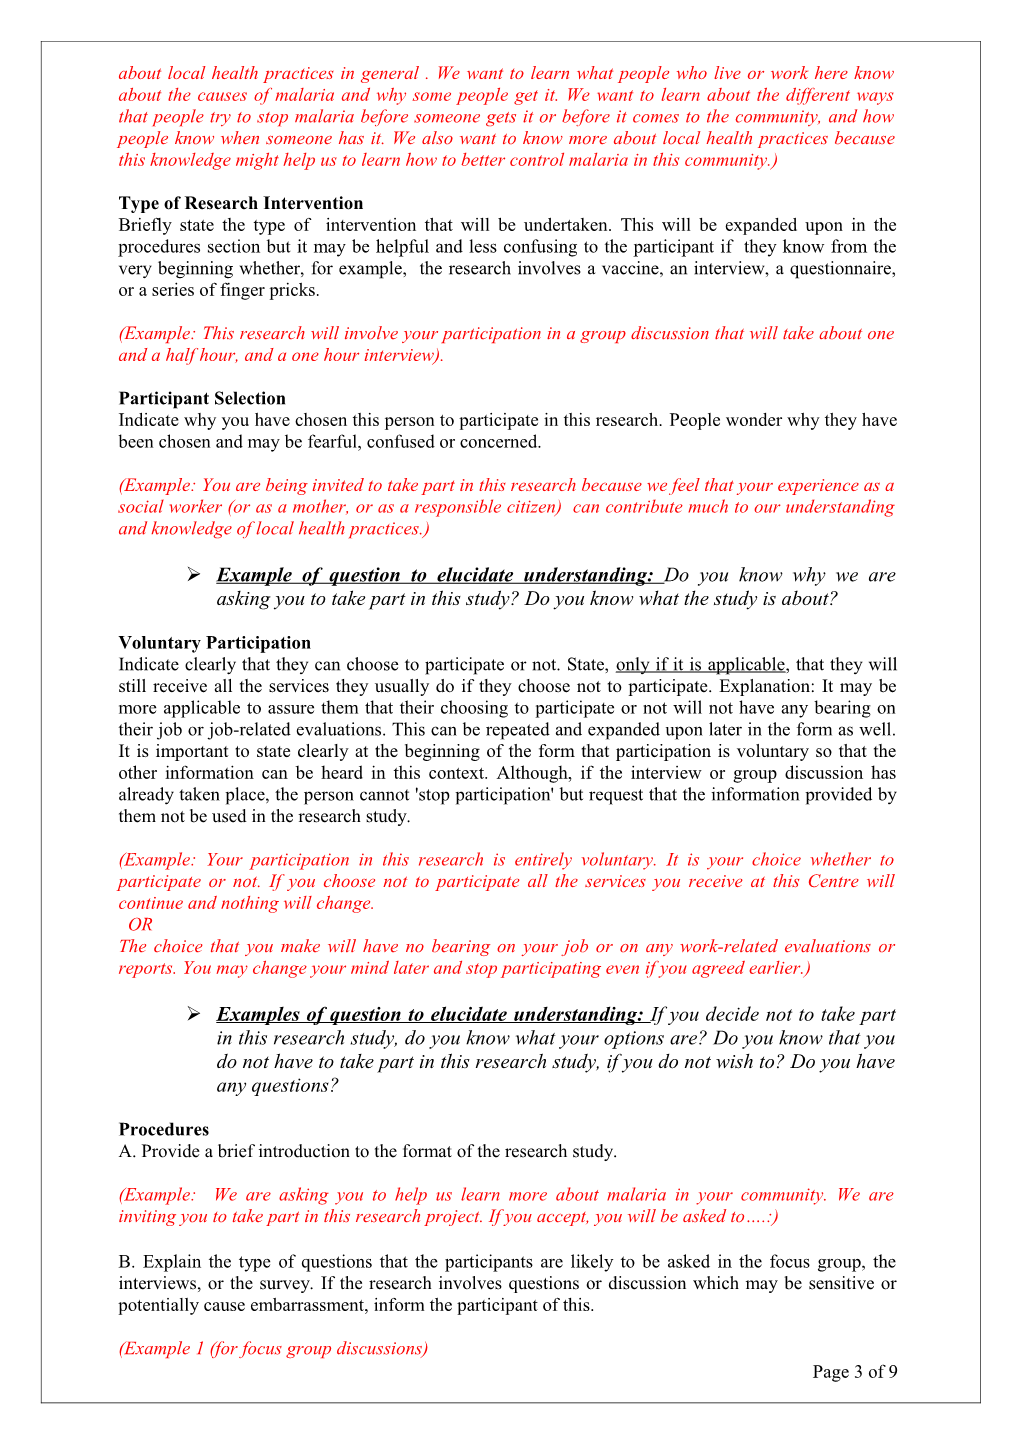 Informed Consent Form Template For Clinical Studies